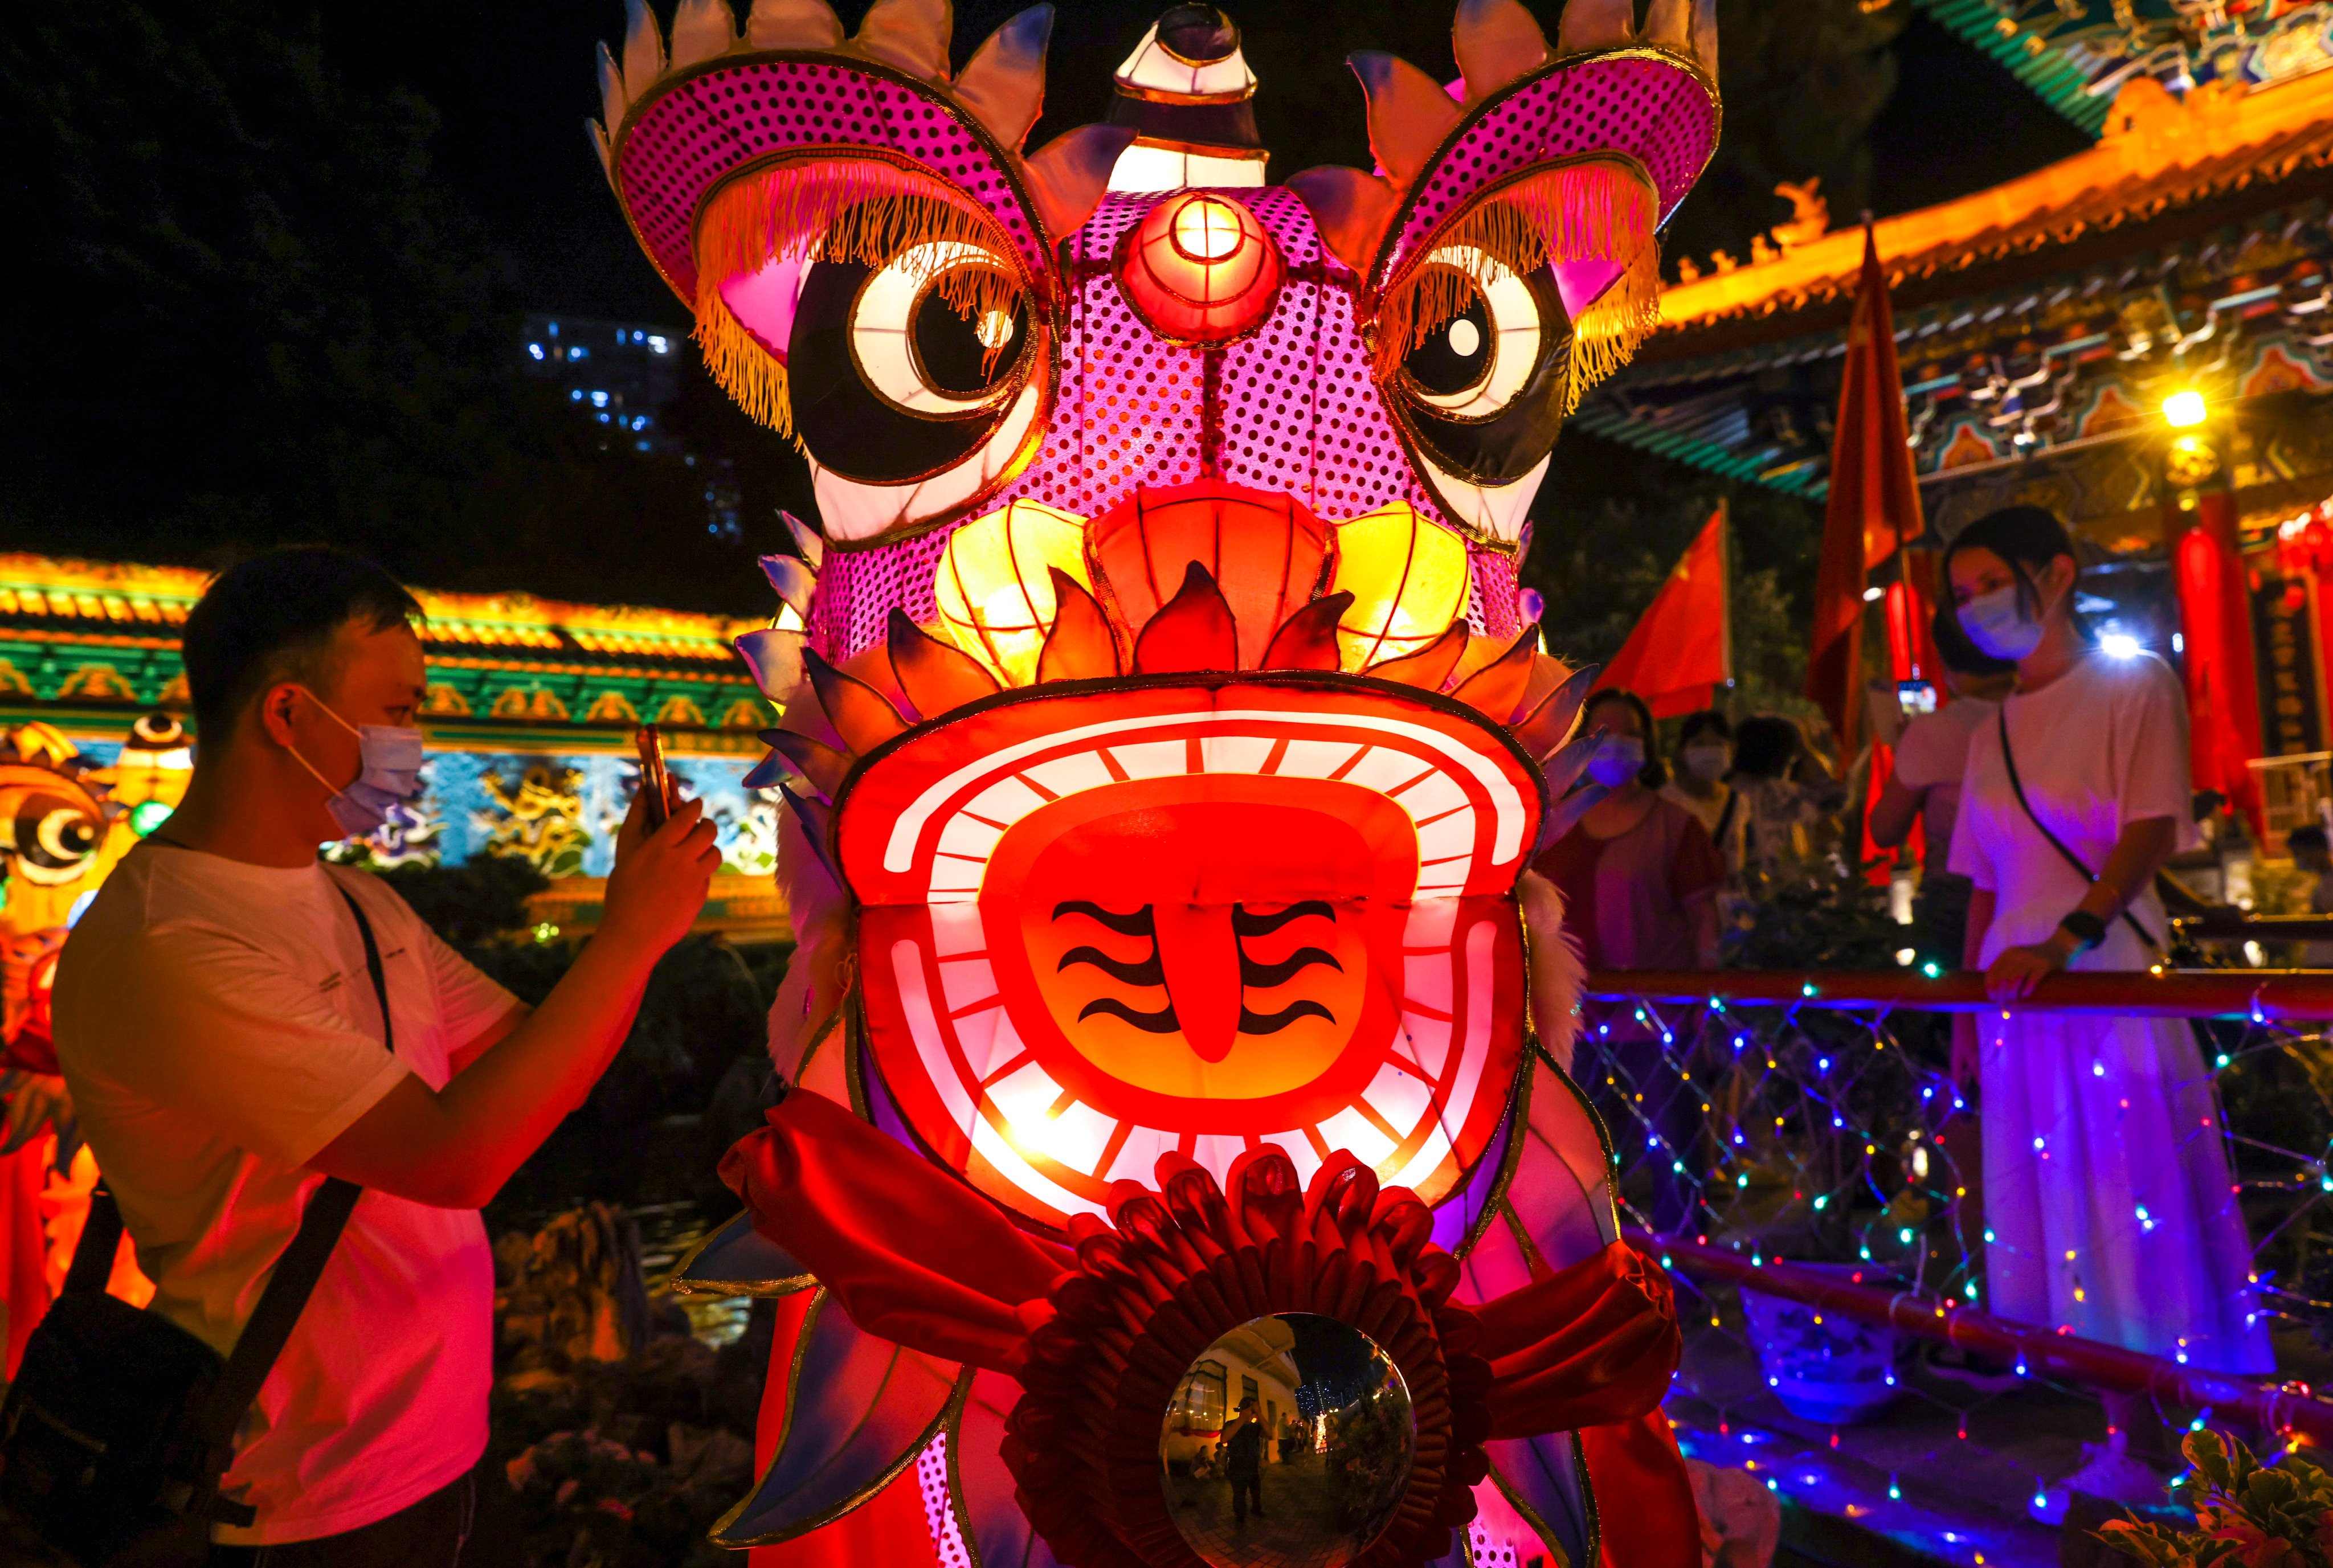 The lantern festival held at Sik Sik Yuen Wong Tai Sin Temple in 2021. Photo: Dickson Lee